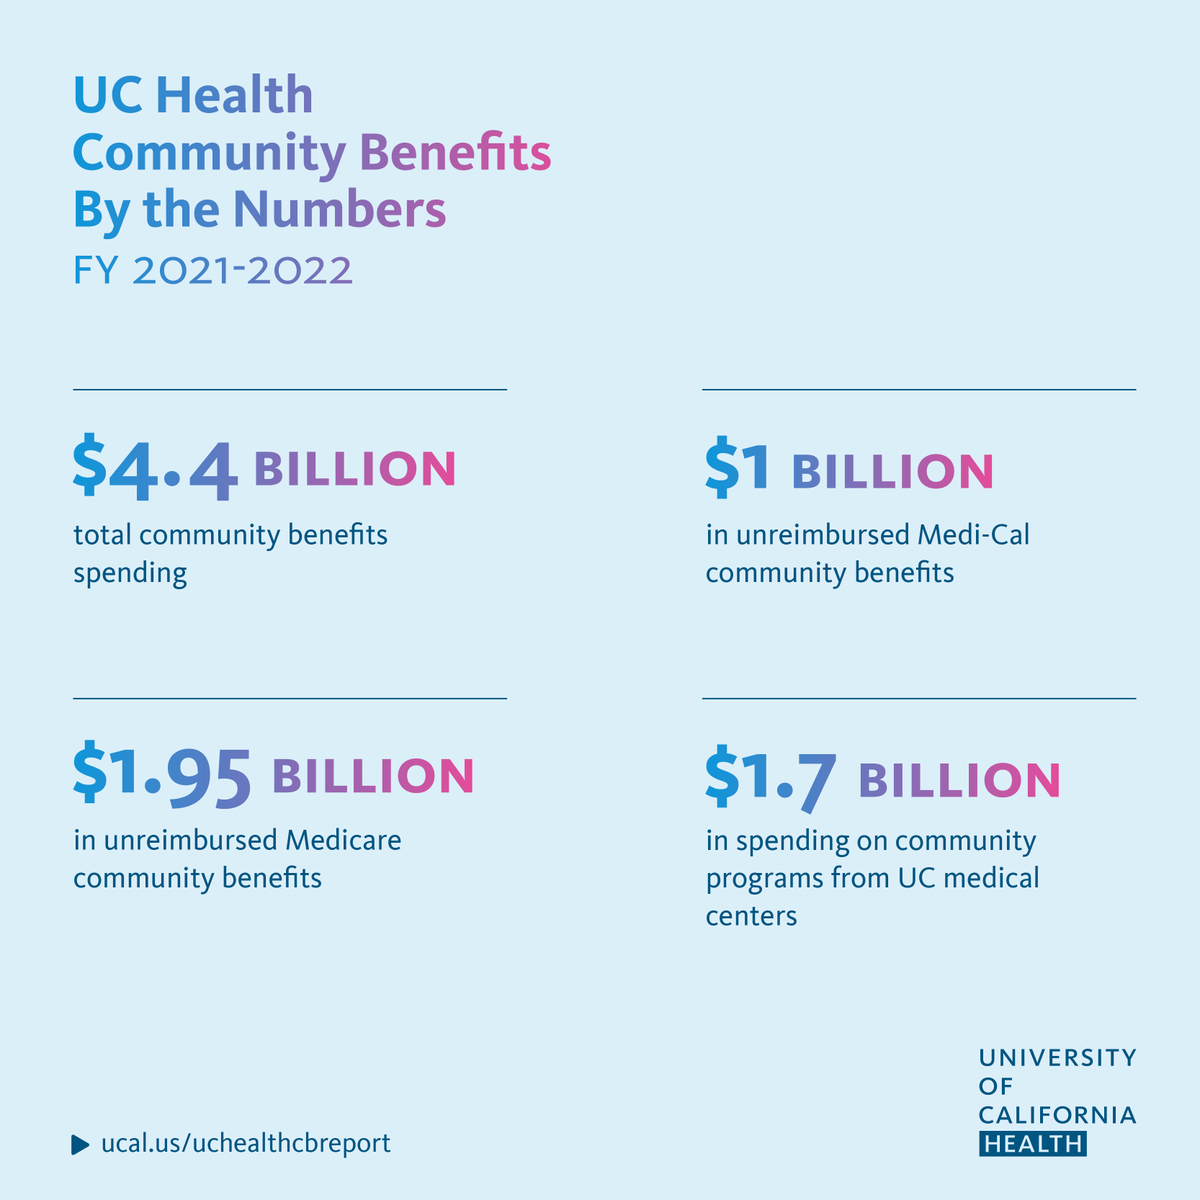 UC Health provides incredible benefits to CA, inc. improving access to health care for the underserved, leading the way in public health, and contributing billions of dollars in #CommunityBenefits through our medical centers & faculty practices. Read more: health.universityofcalifornia.edu/reports/uc-hea…